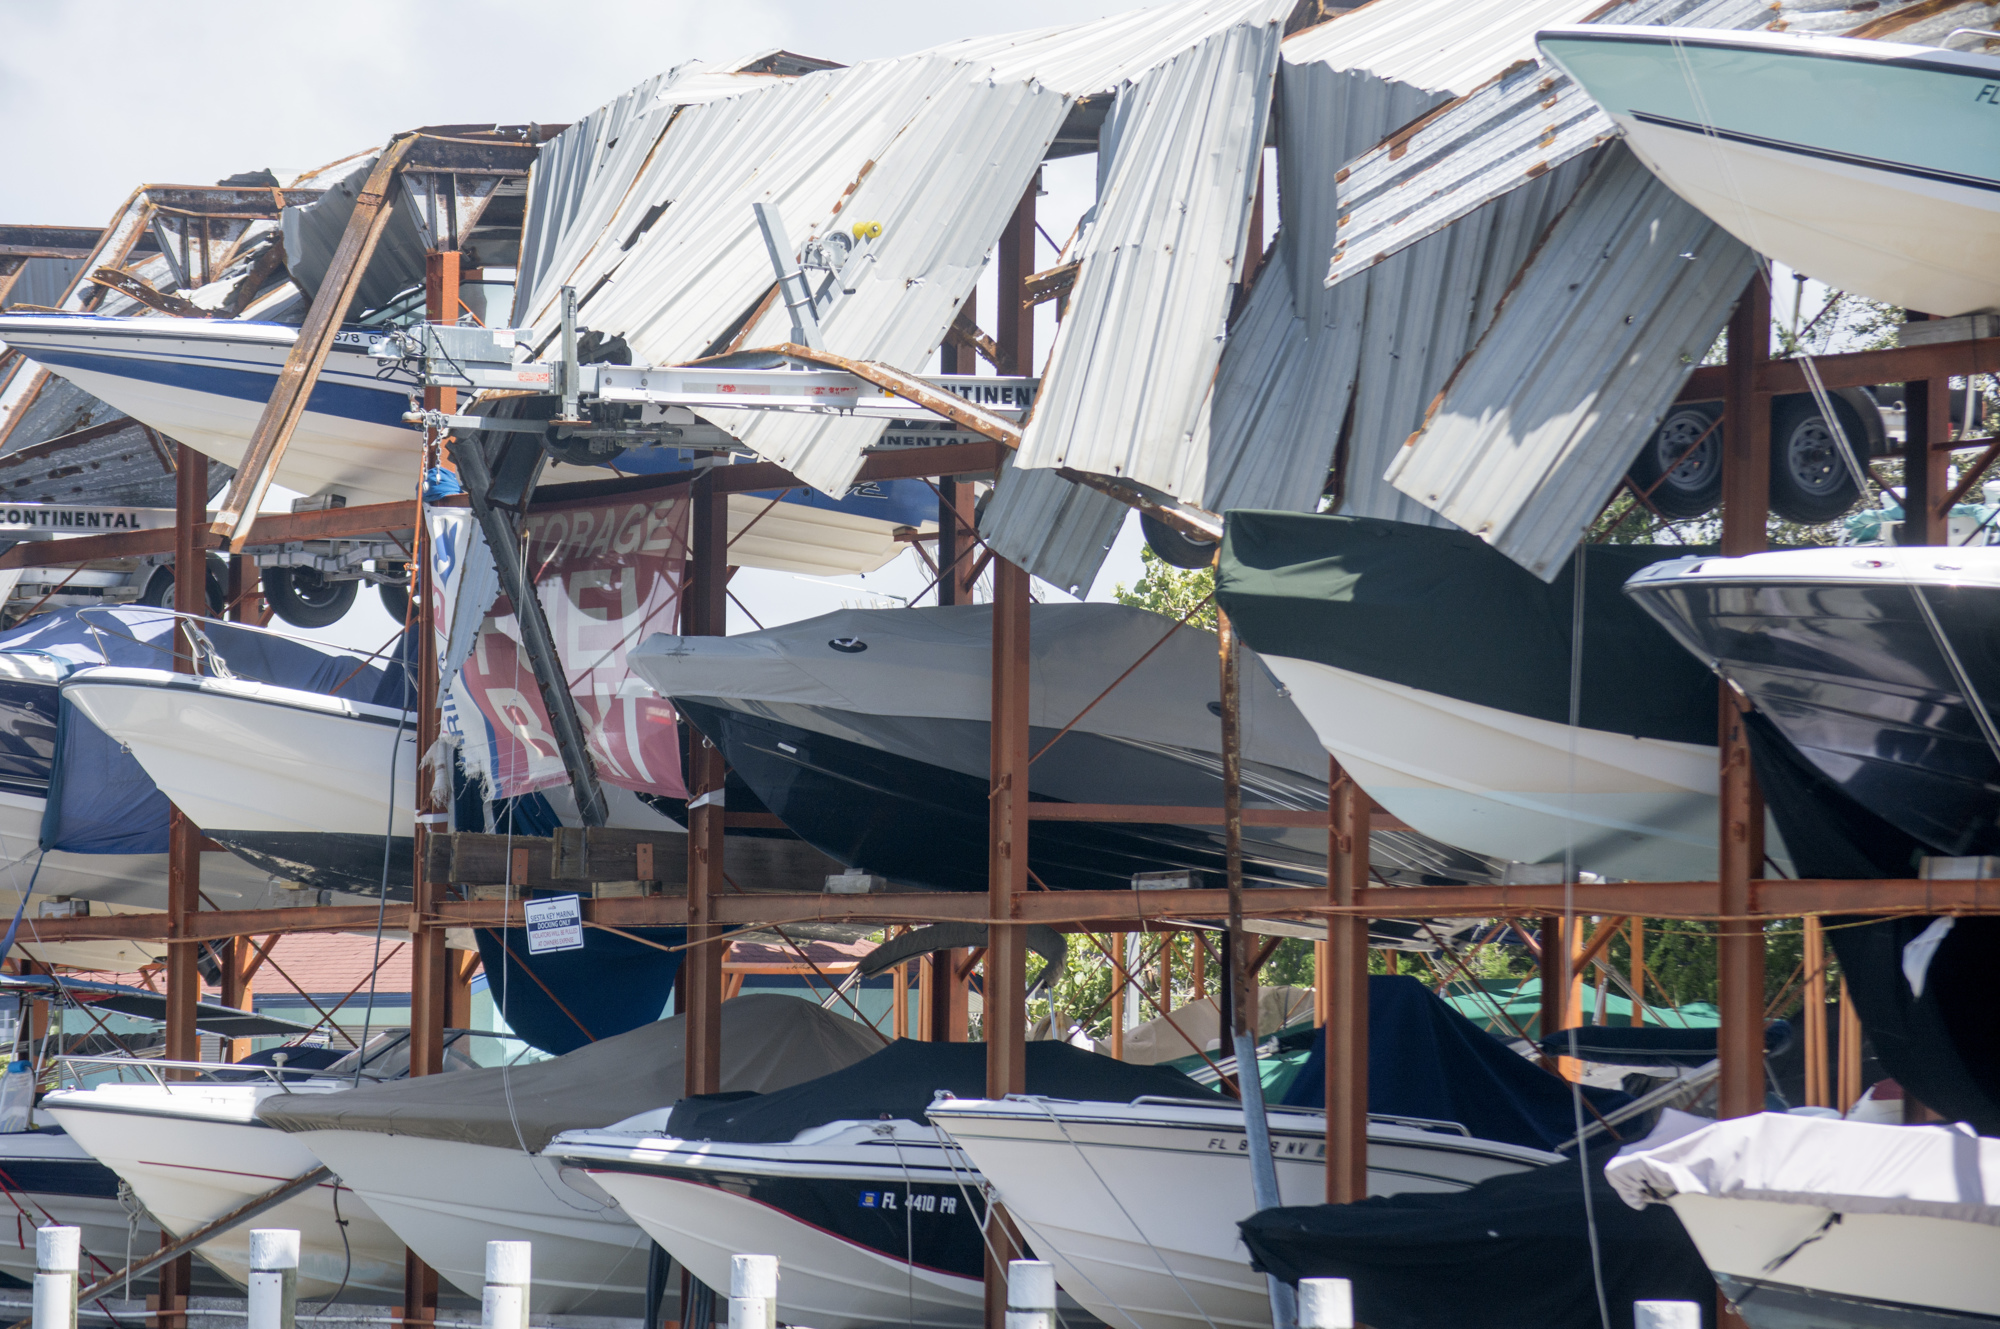 While not as significant as many feared, Hurricane Irma still damaged Sarasota.